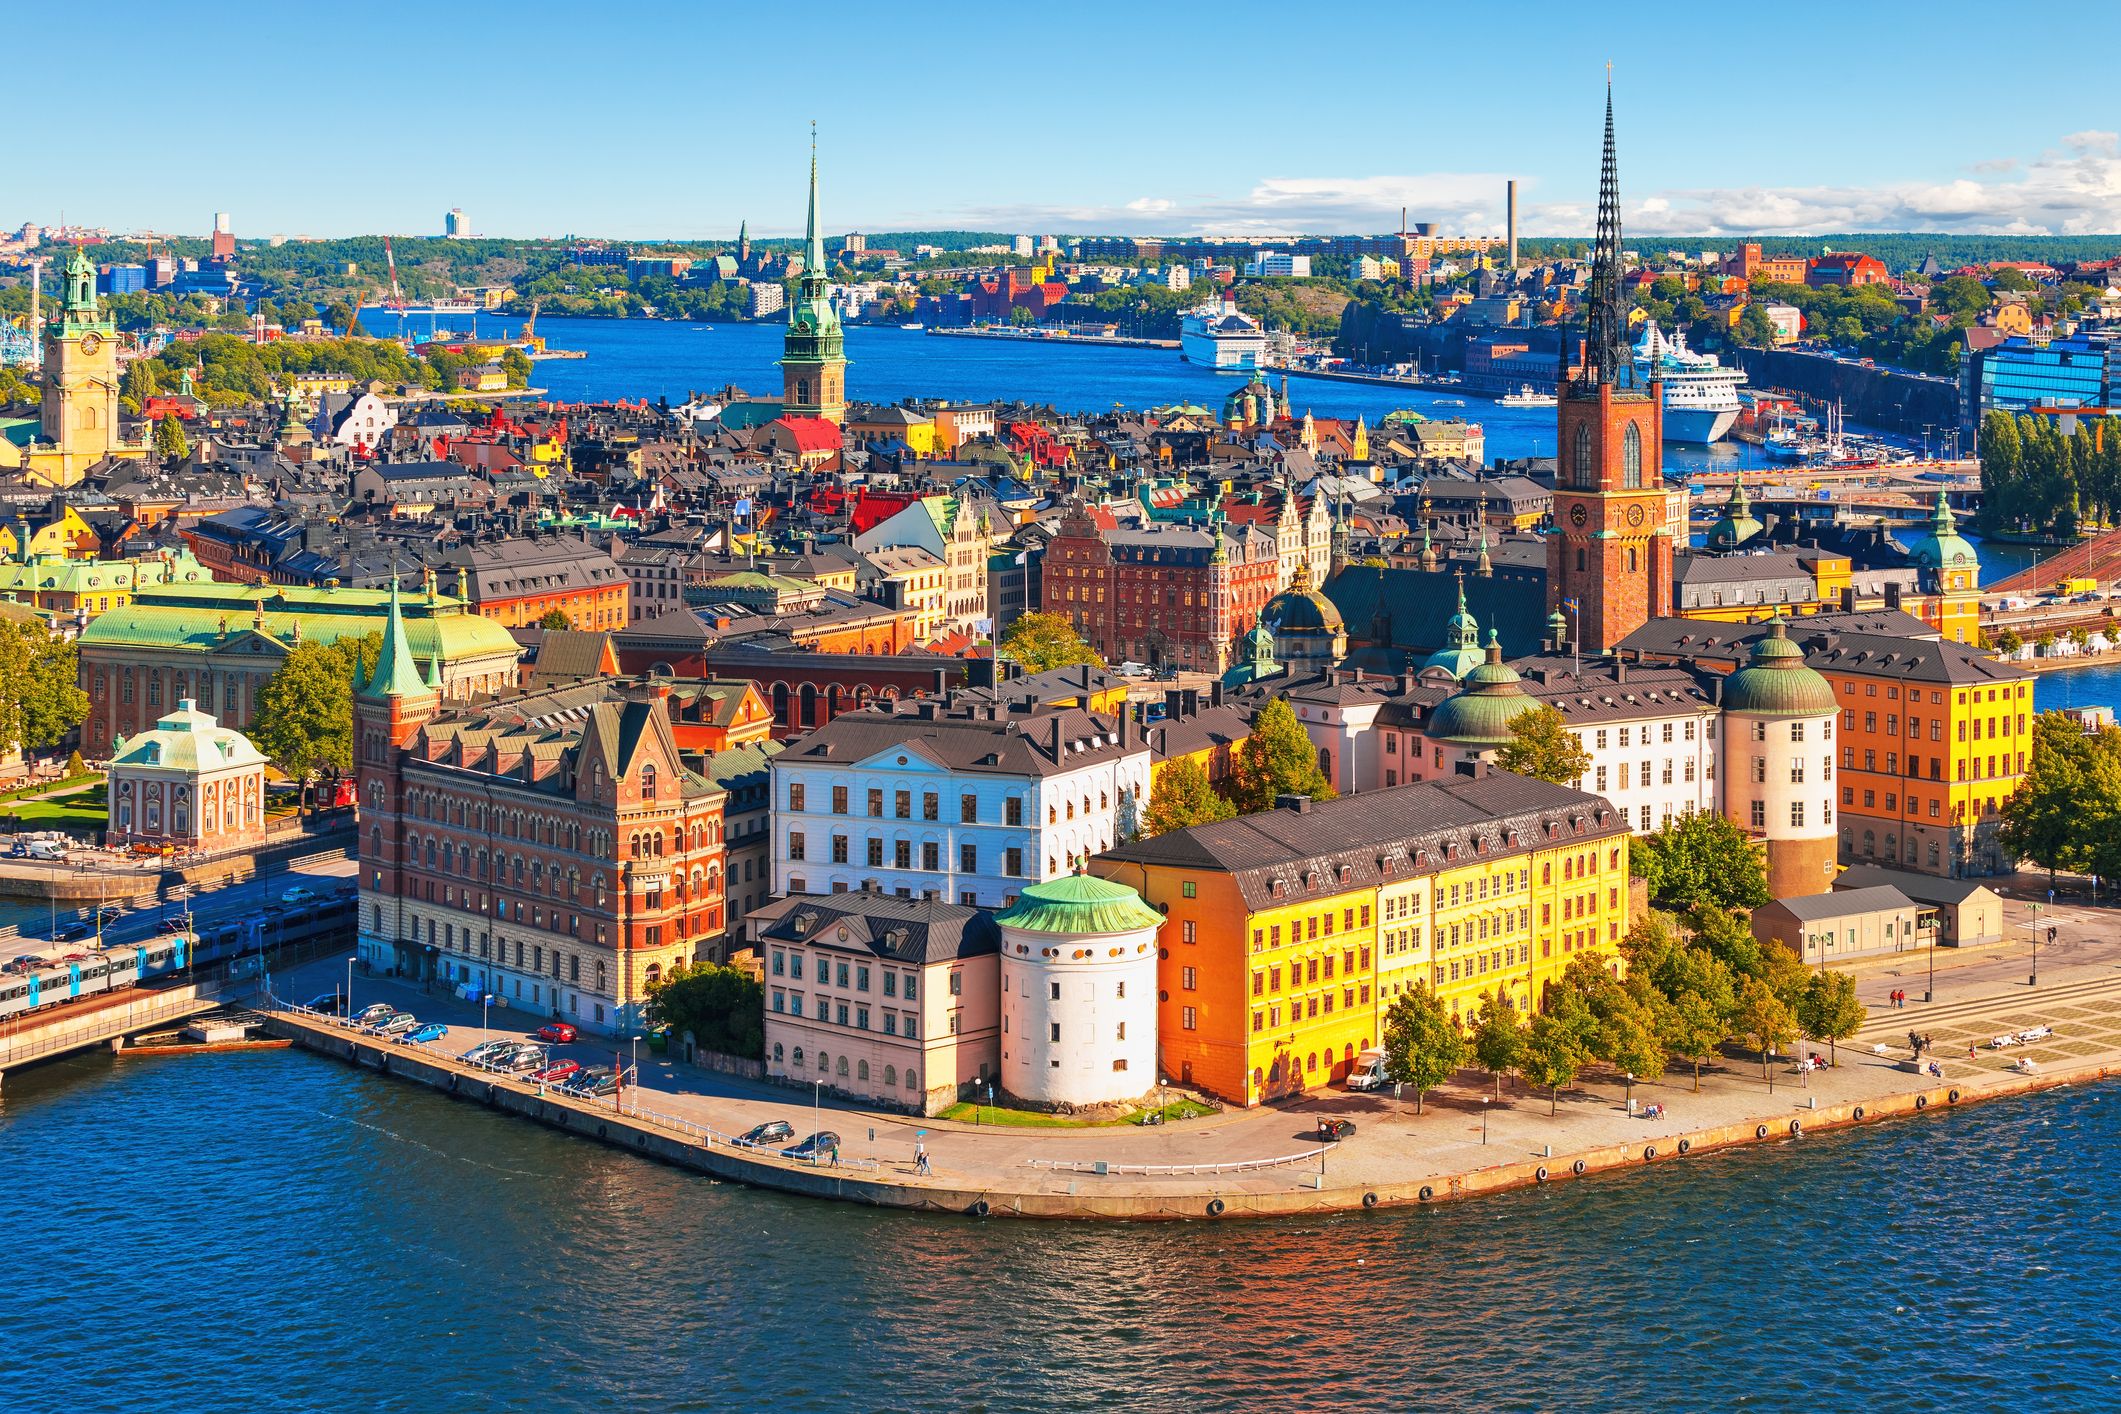 Flights to Sweden in the $300s to $500s round-trip!